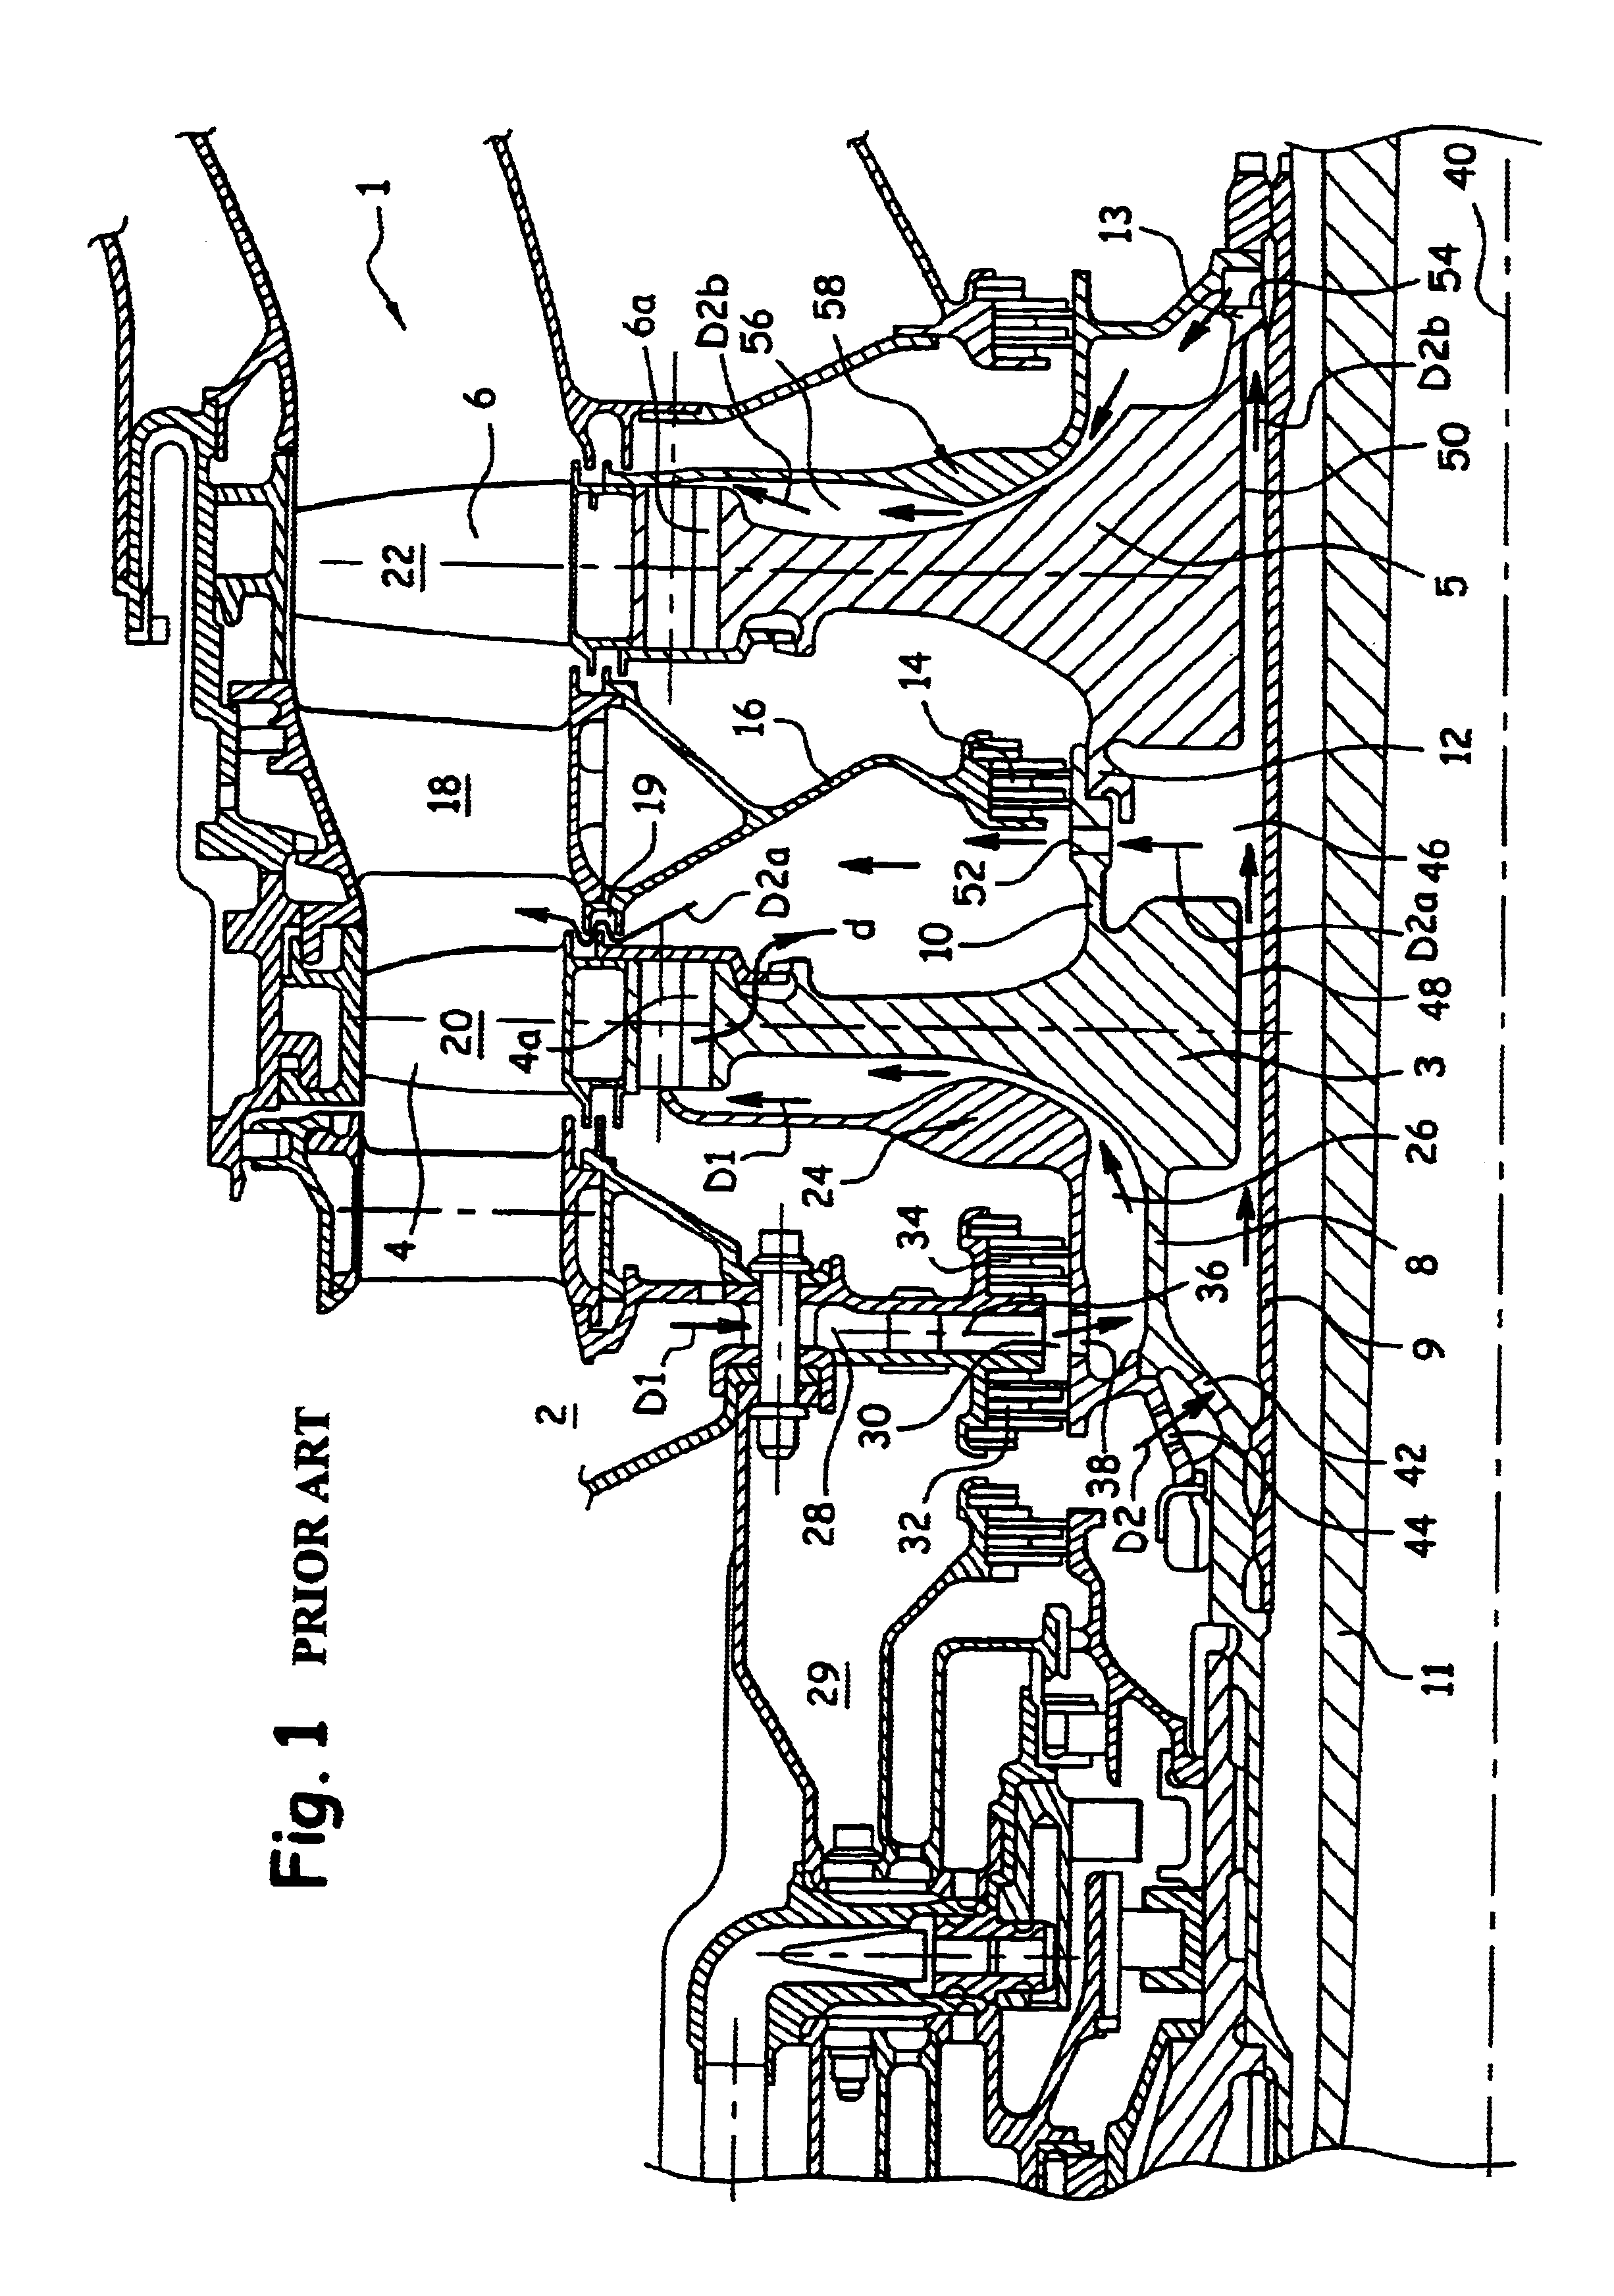 Ventilation device for a high pressure turbine rotor of a turbomachine